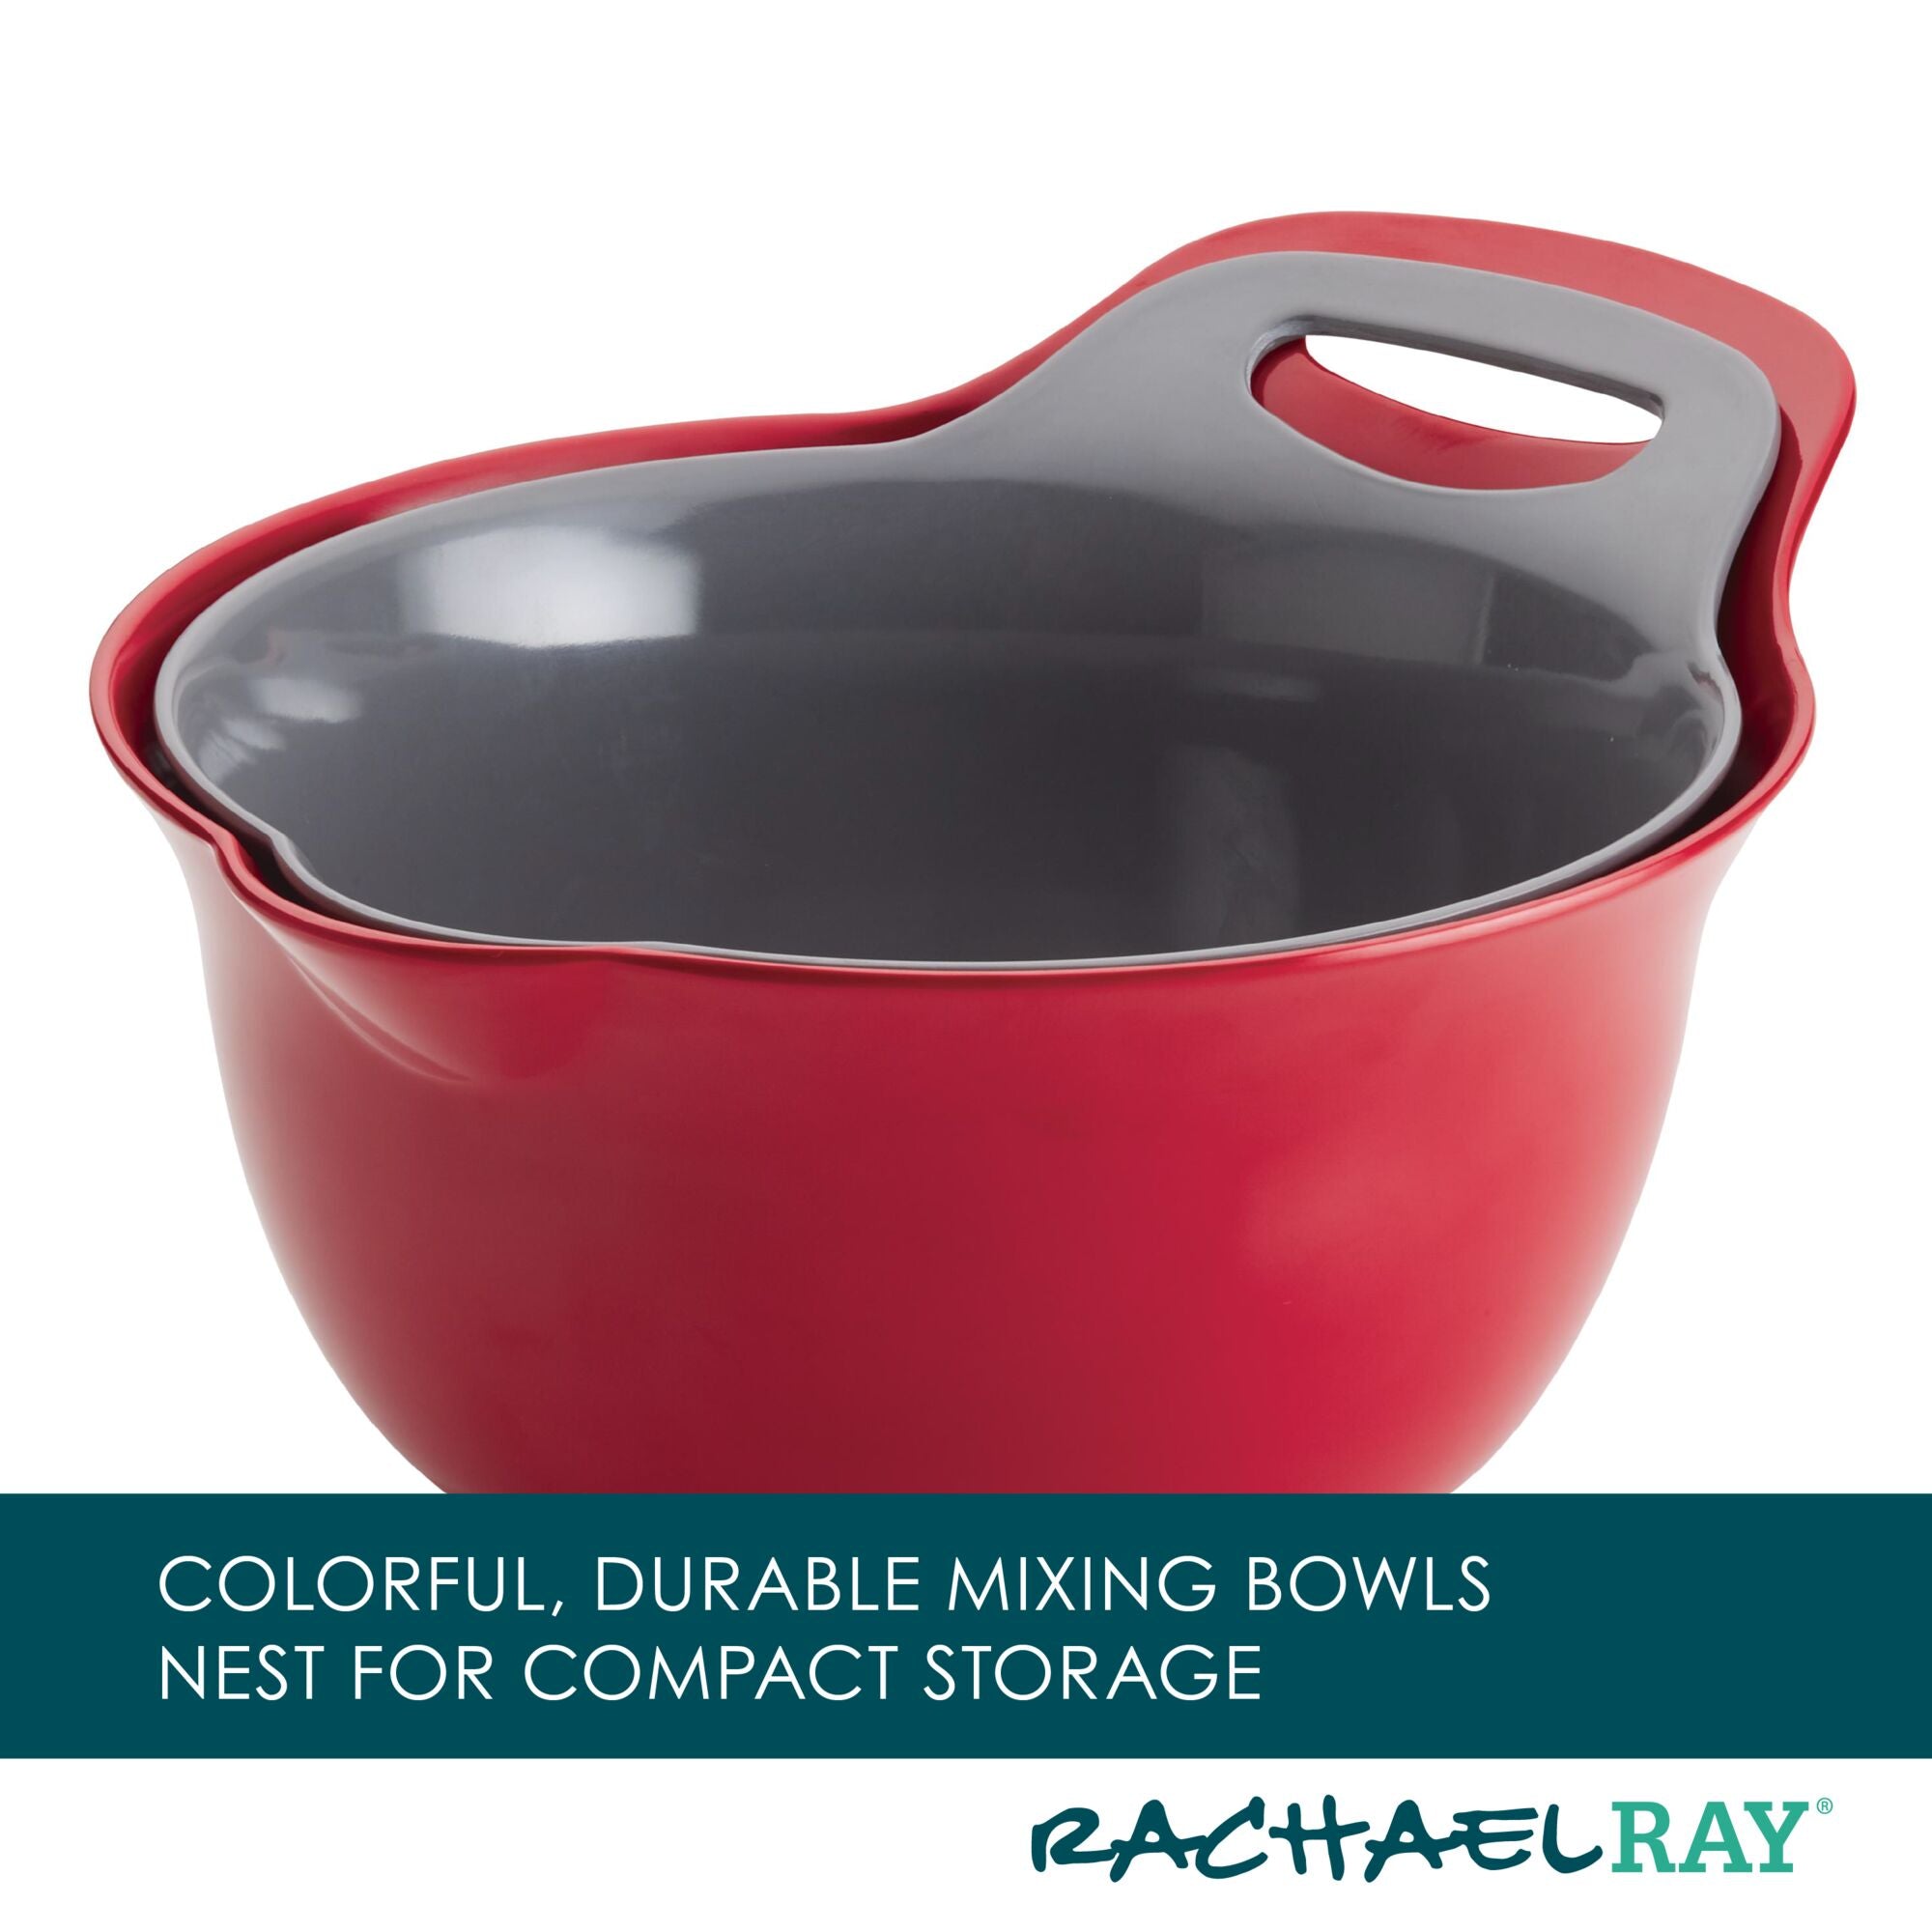 Rachael Ray Tools & Gadgets Nesting Mixing Bowl Set, 2 Piece - Red & Gray,  1 - Fry's Food Stores